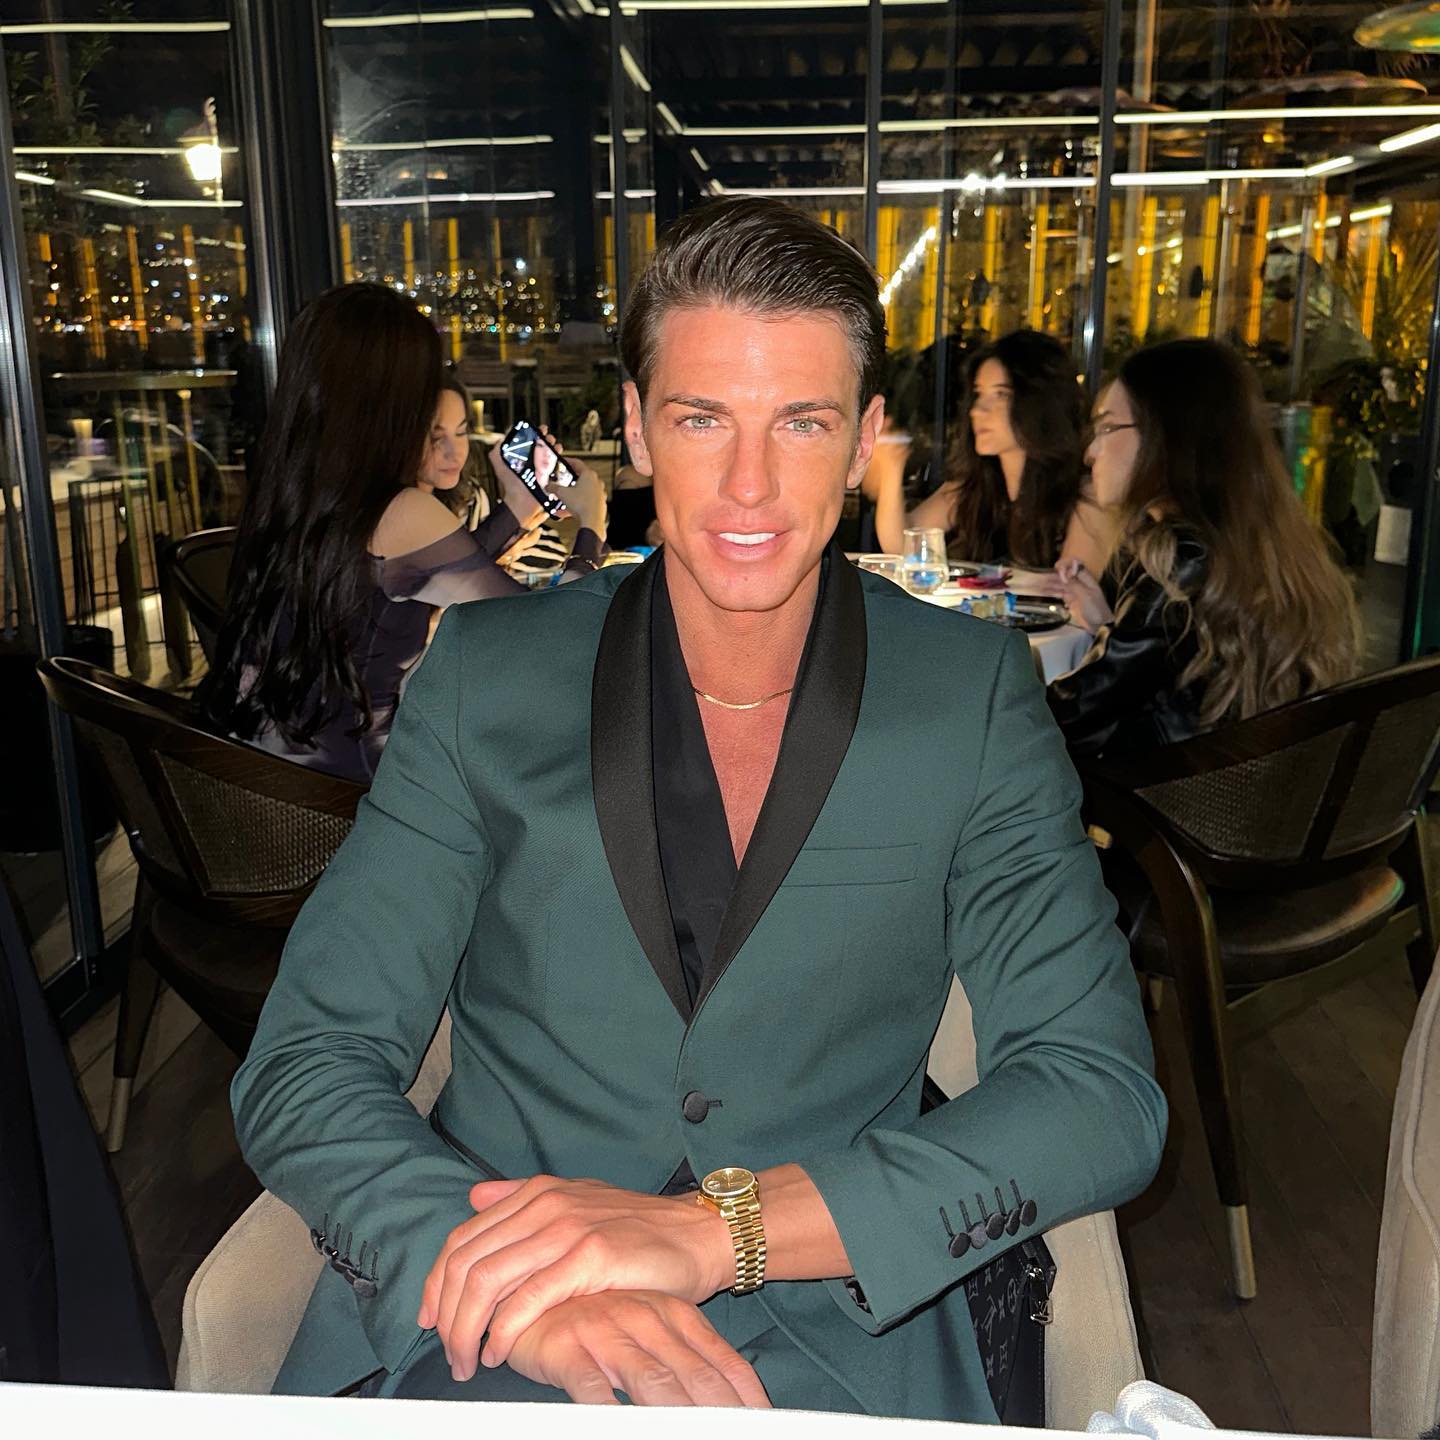 Photo by 𝑰𝑳𝑰𝑨𝑺 𝑲𝑶𝑵𝑺𝑻𝑨𝑵𝑻𝑰𝑵𝑶𝑼 in Istanbul Turkey with @davvero instyle and @salvatoreistanbul. May be a selfie of 2 people hair wrist watch suit dinner jacket and blazer